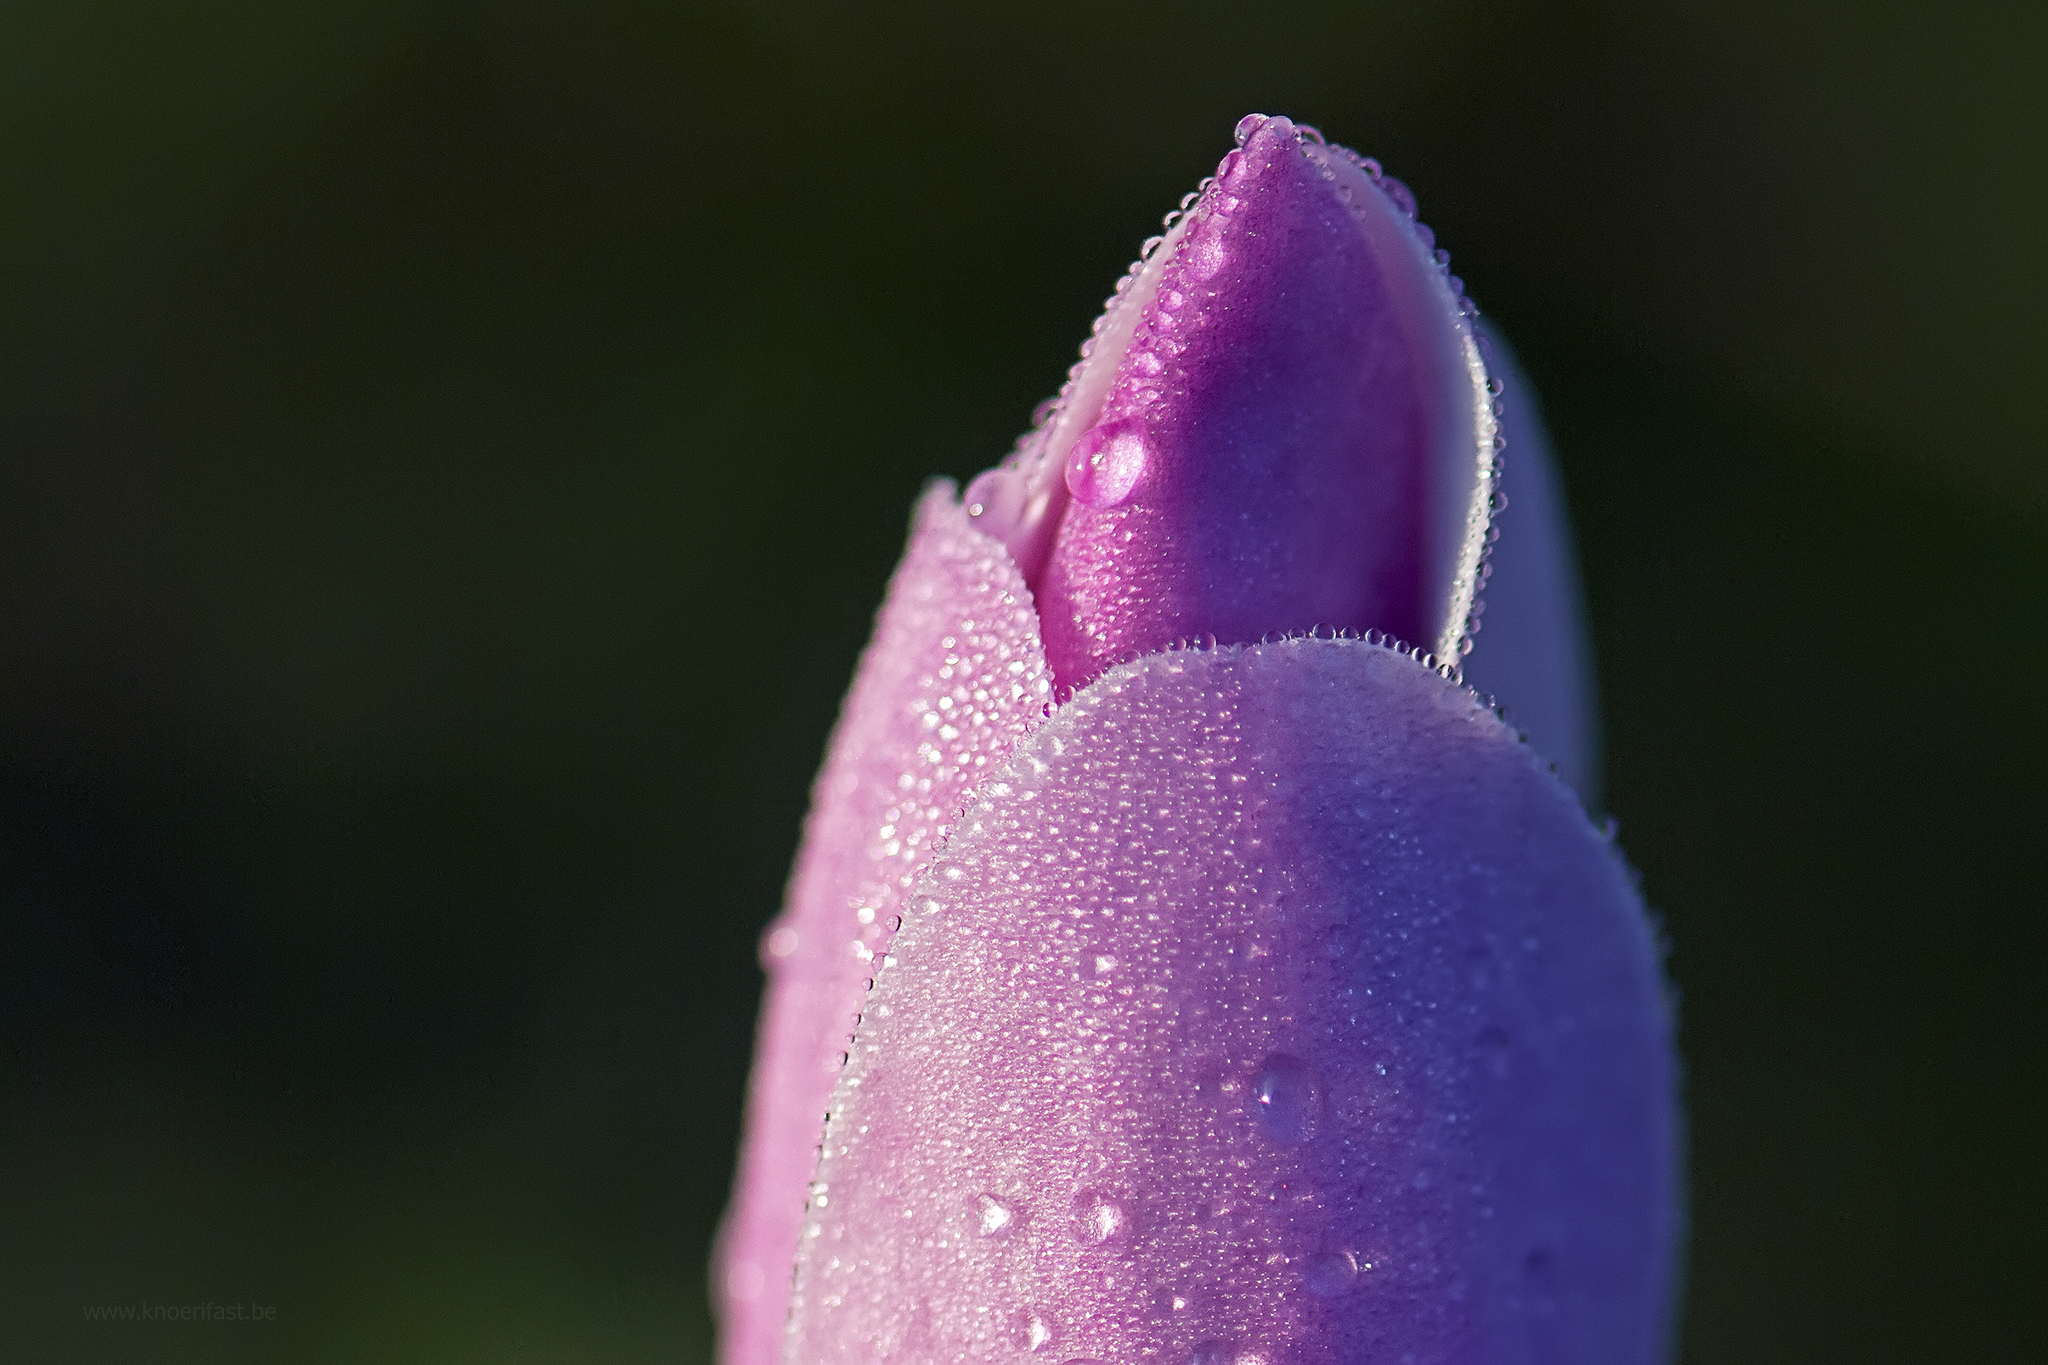 Morning dew on a Magnolia ...